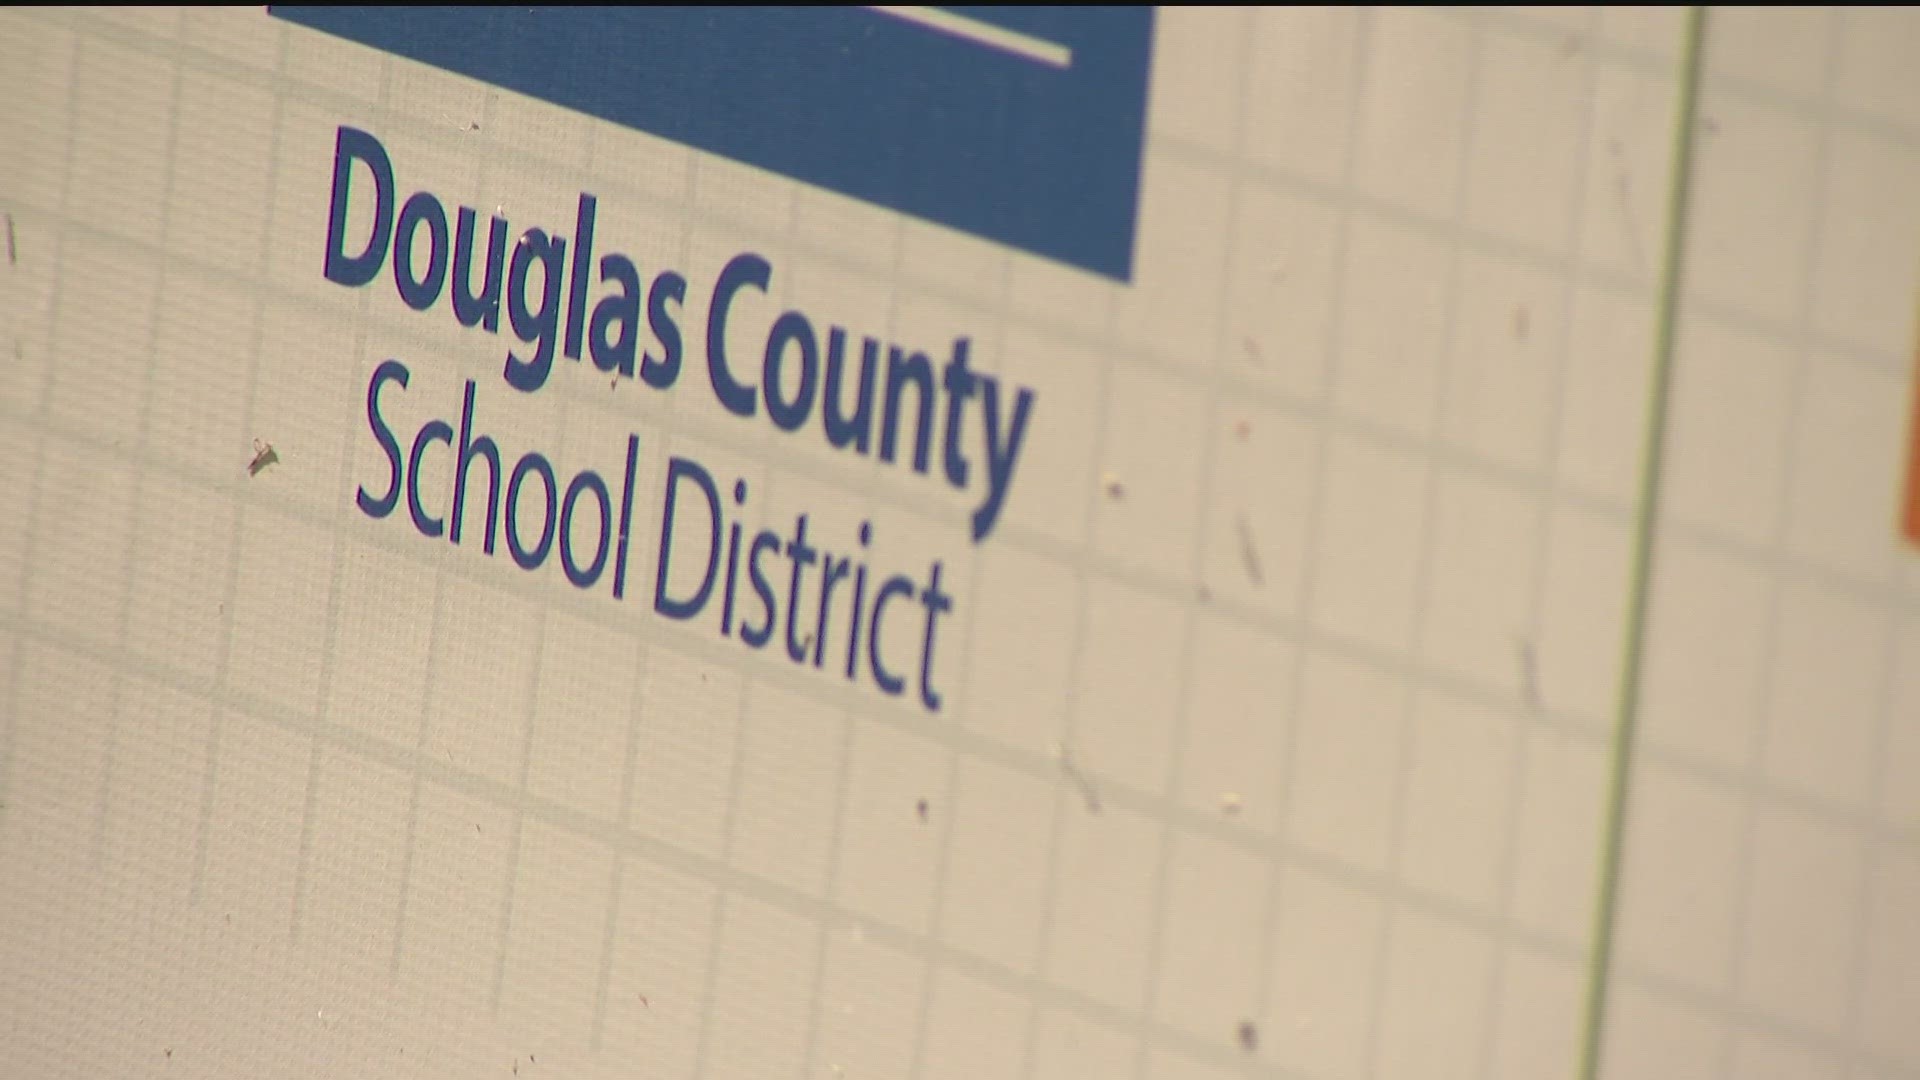 The district attempted a similar measure last year, but it failed by a small margin.